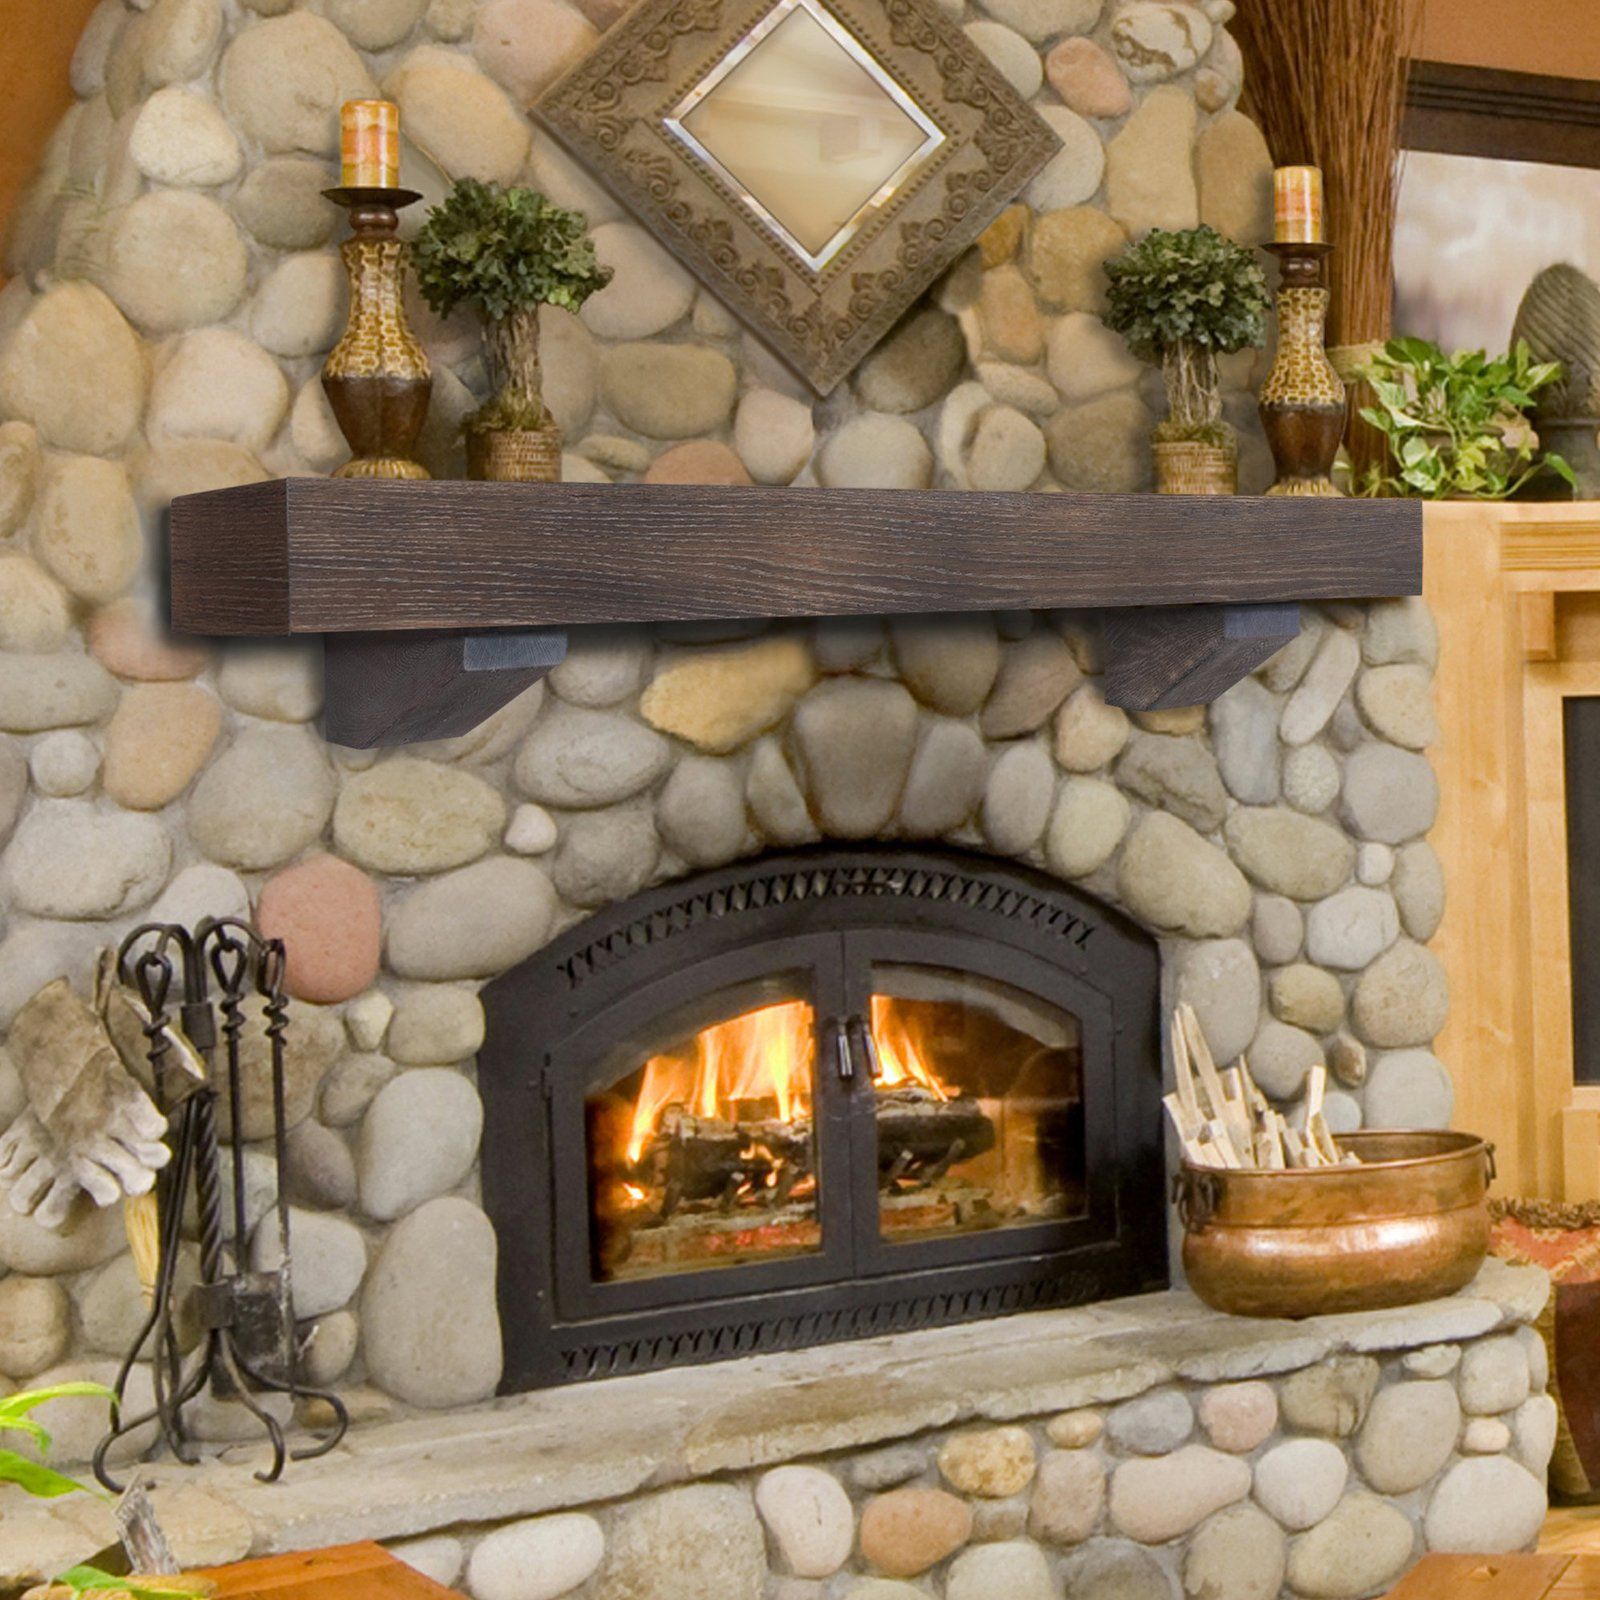 Reclaimed Fireplace Mantel New Have to Have It Donny Osmond Home Heritage Series Reclaimed